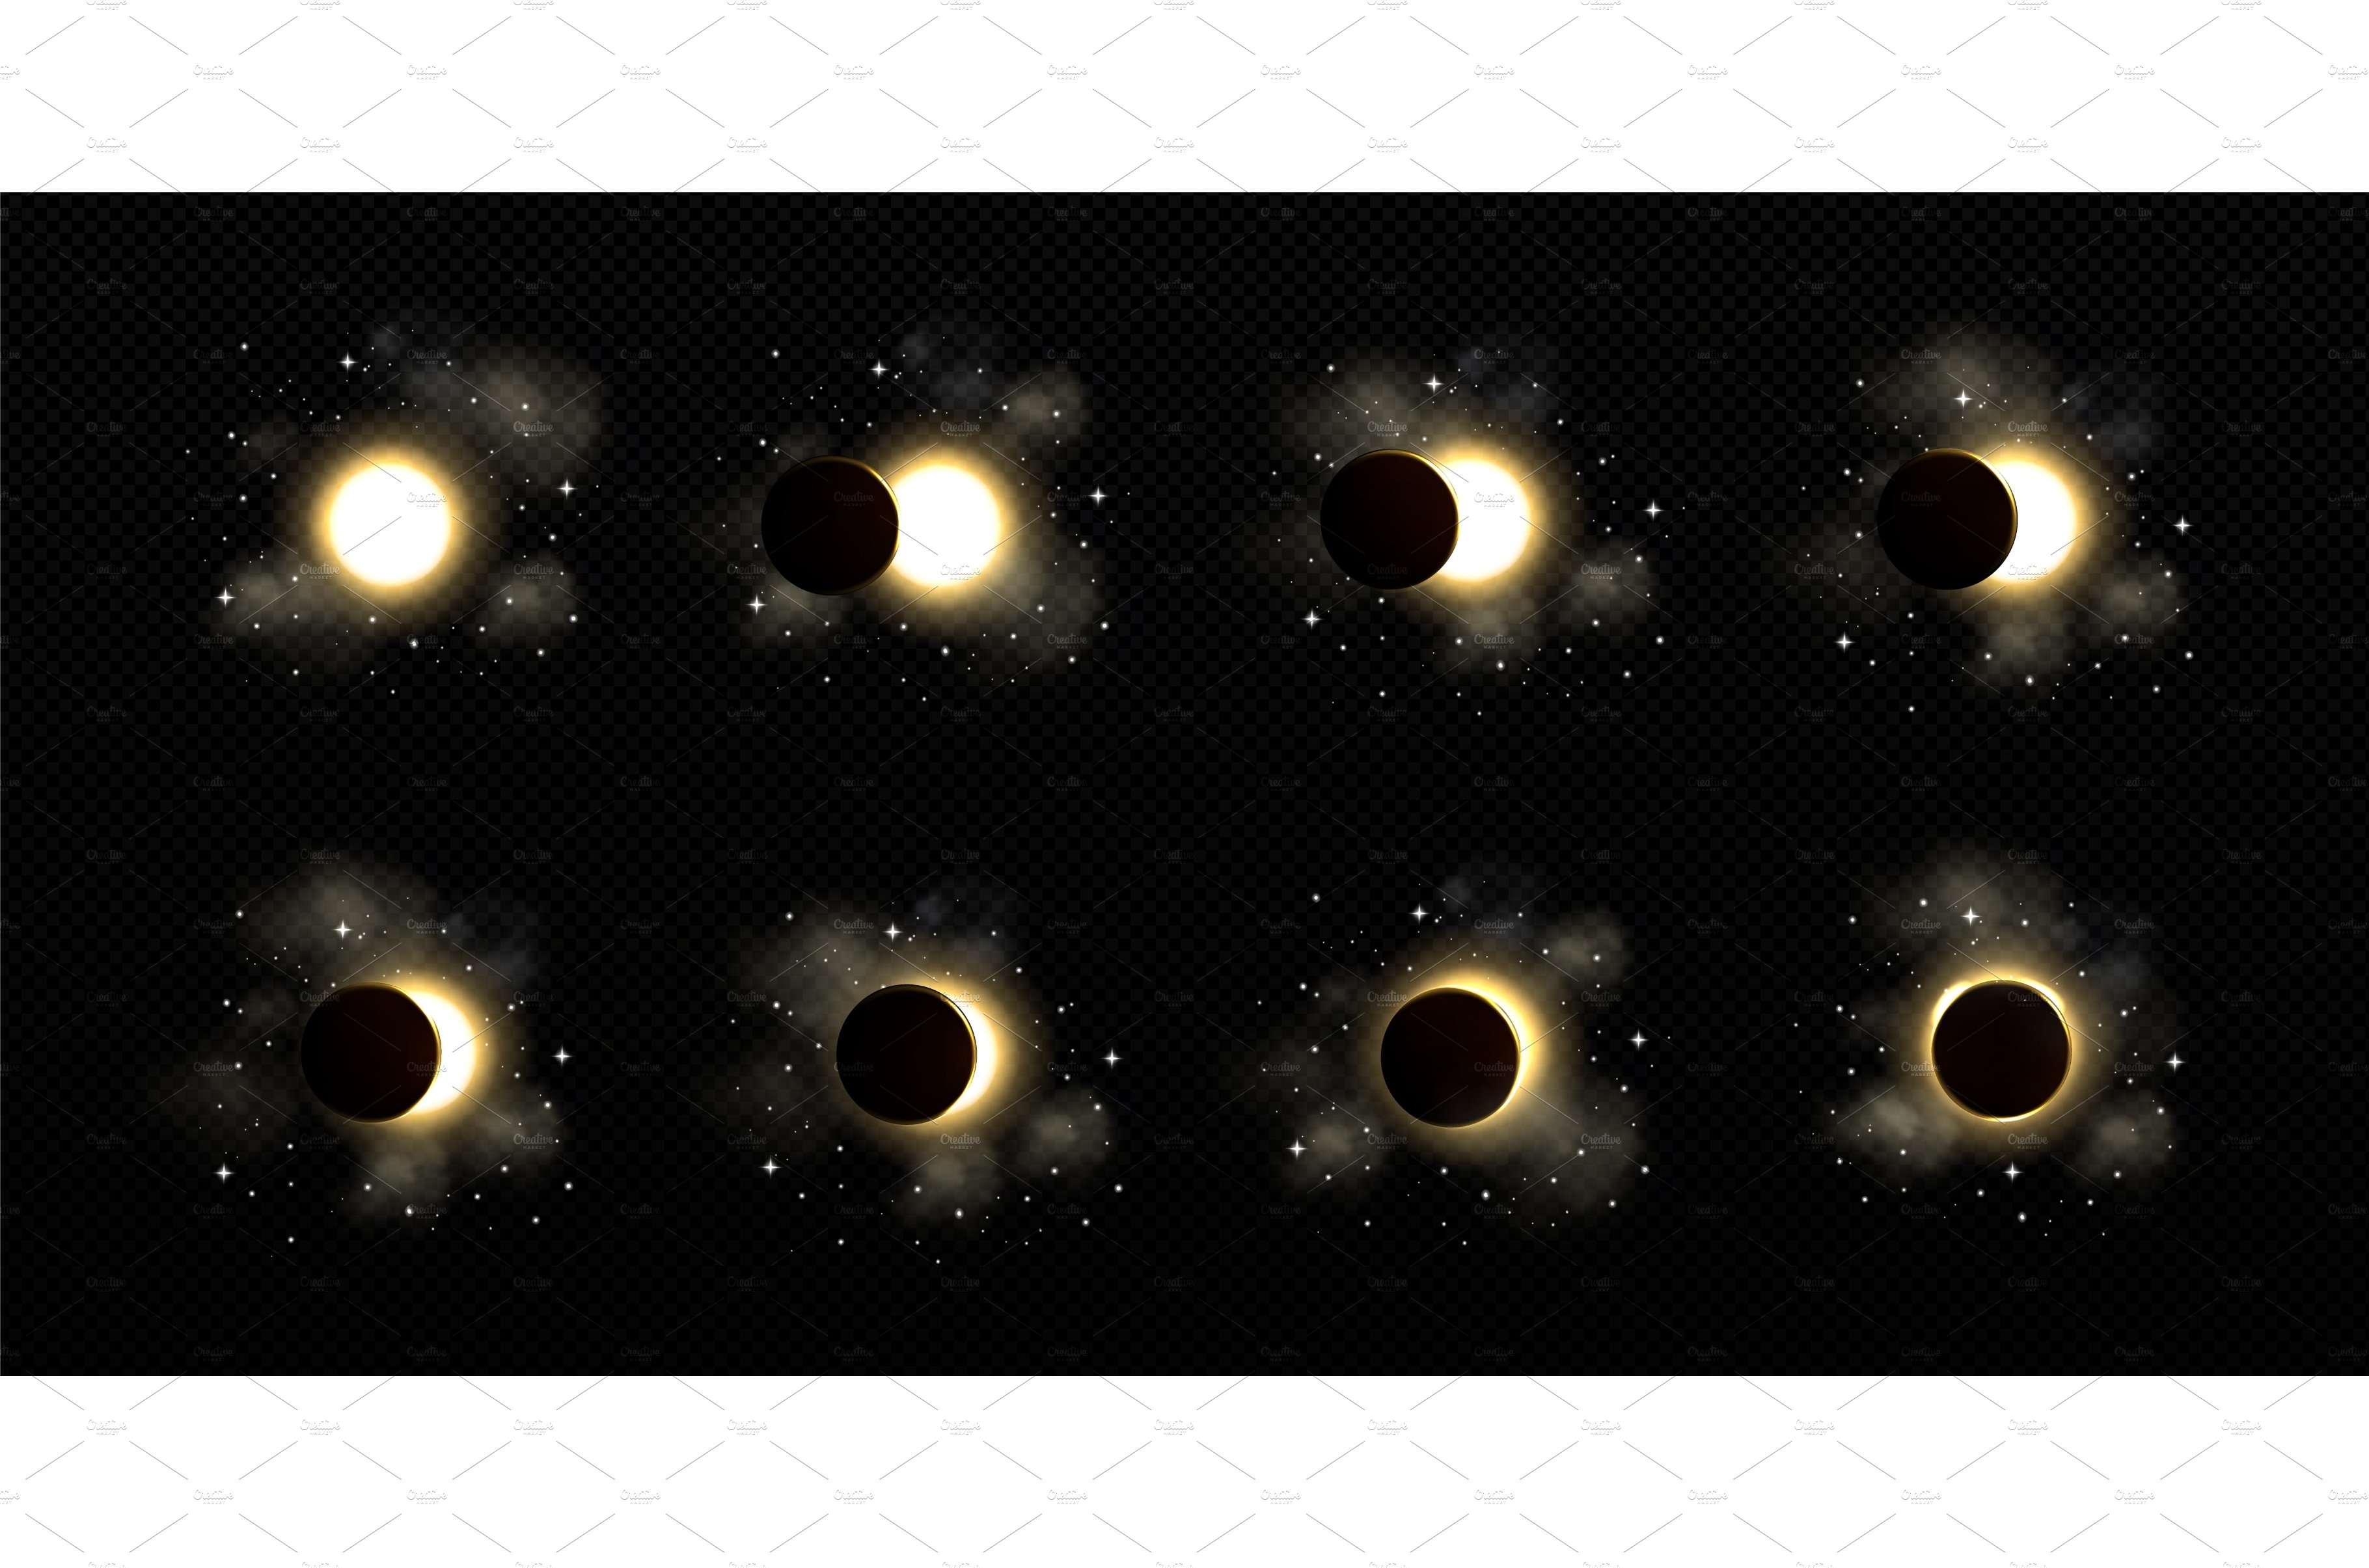 Solar or lunar eclipse with stars cover image.